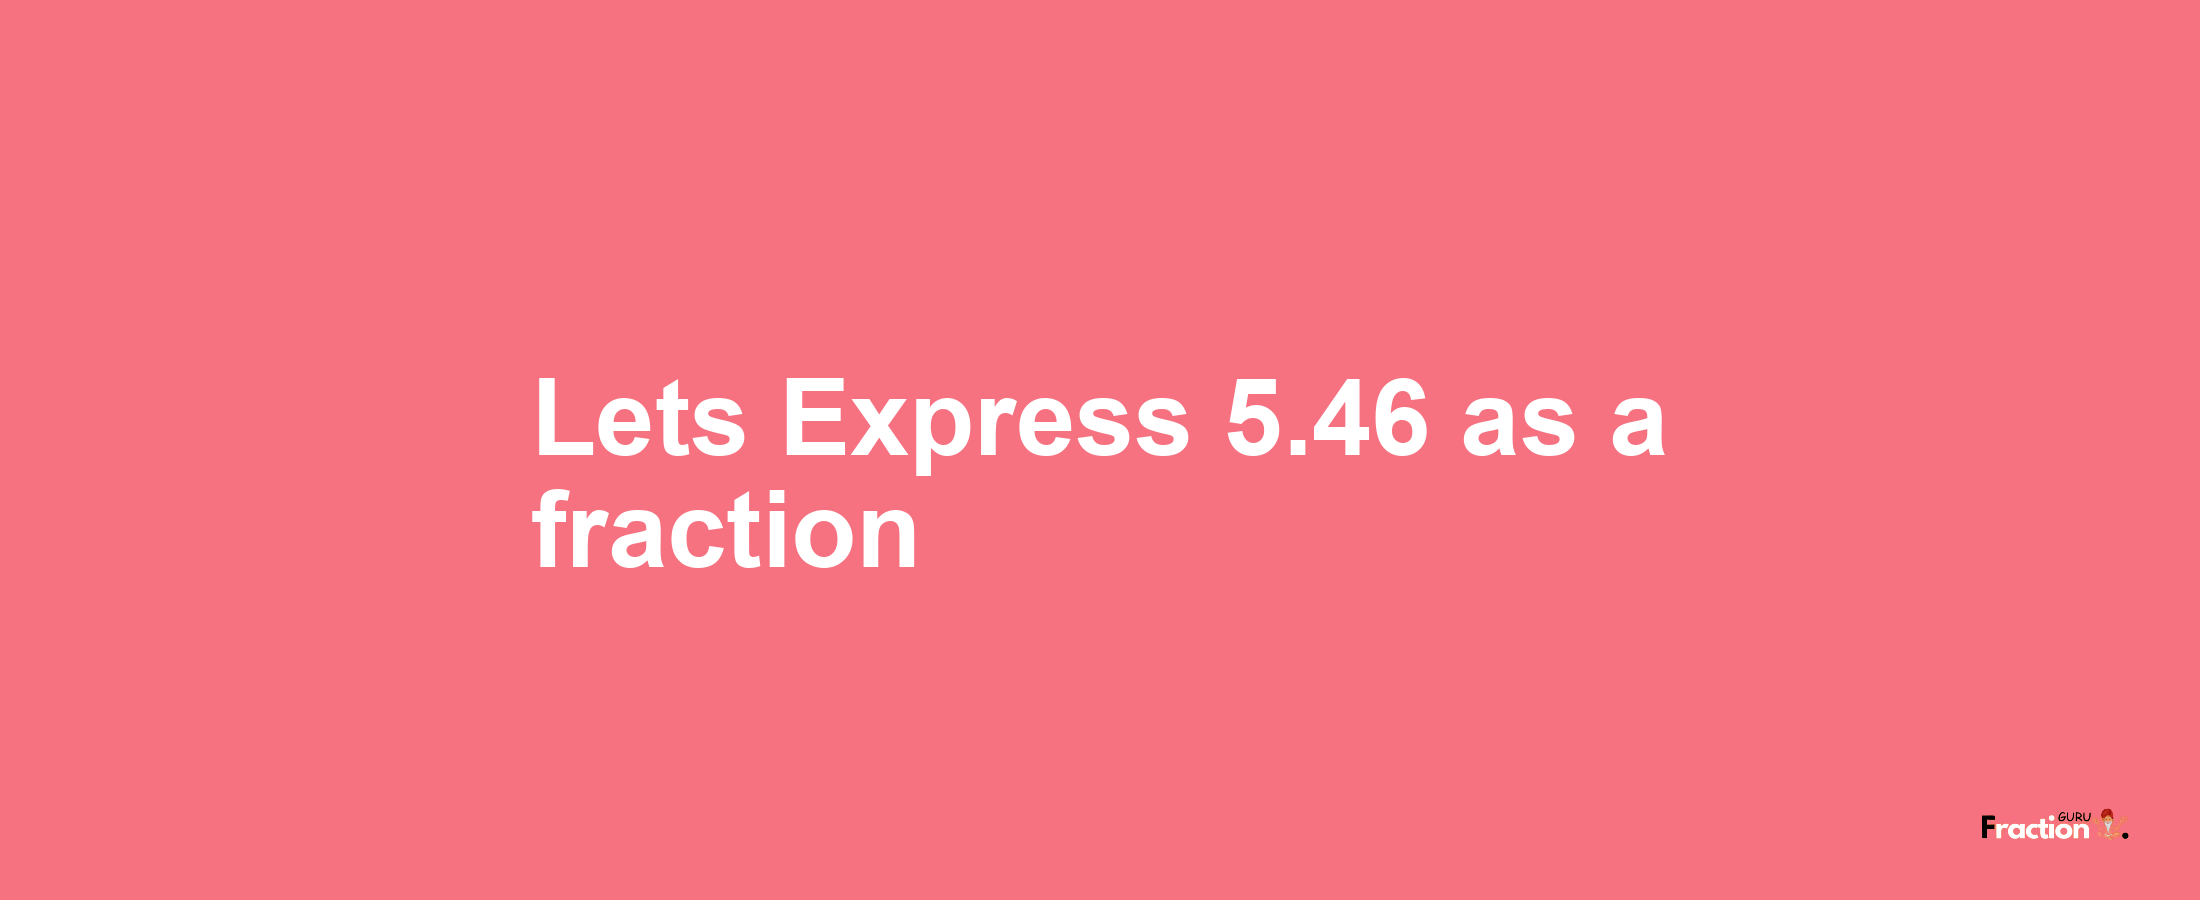 Lets Express 5.46 as afraction